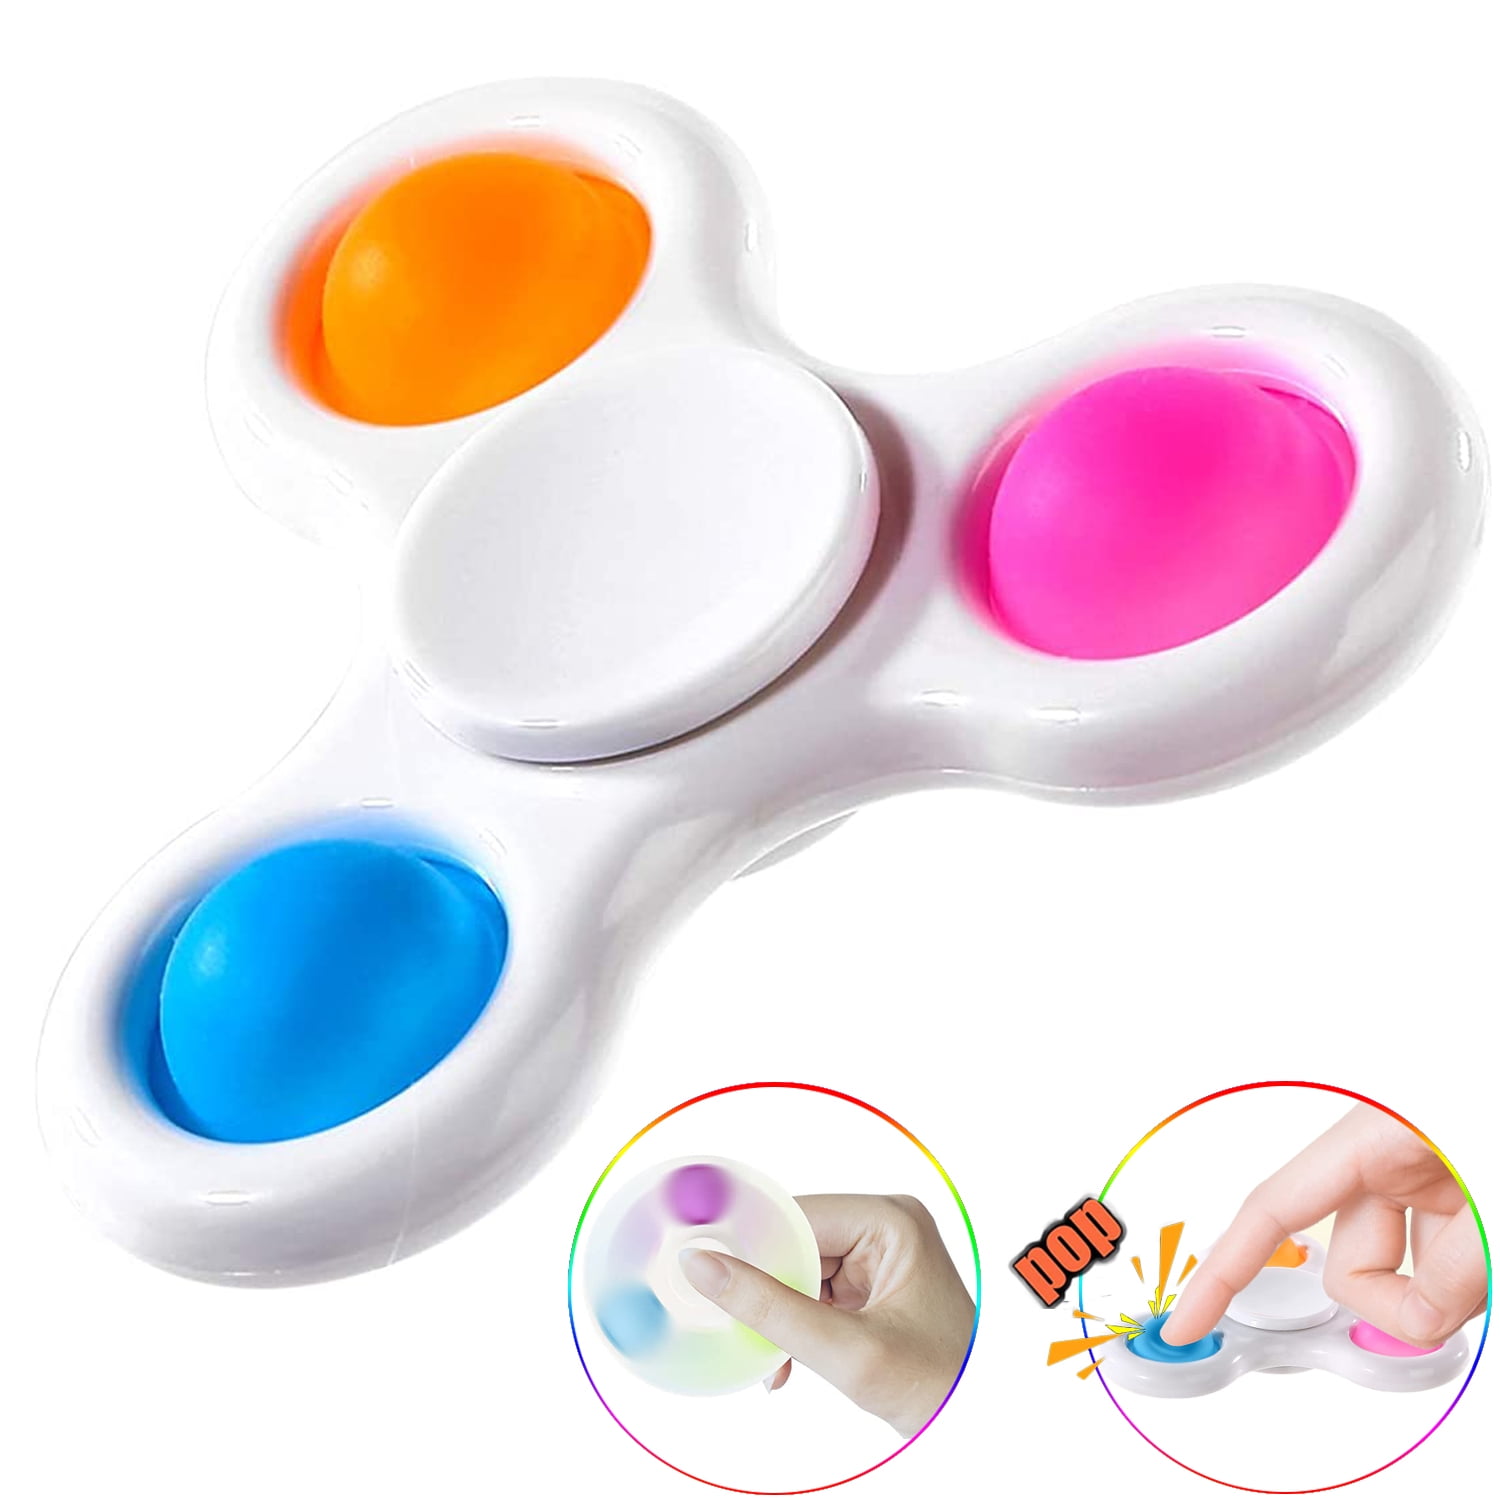 Bubble Popper Fidget Toy Stress Anxiety Relief Toys for ADHD Autism Special Needs UK-STOCK A Fidget Toys Set for Kids & Adults Pop It Fidget Sensory Toy